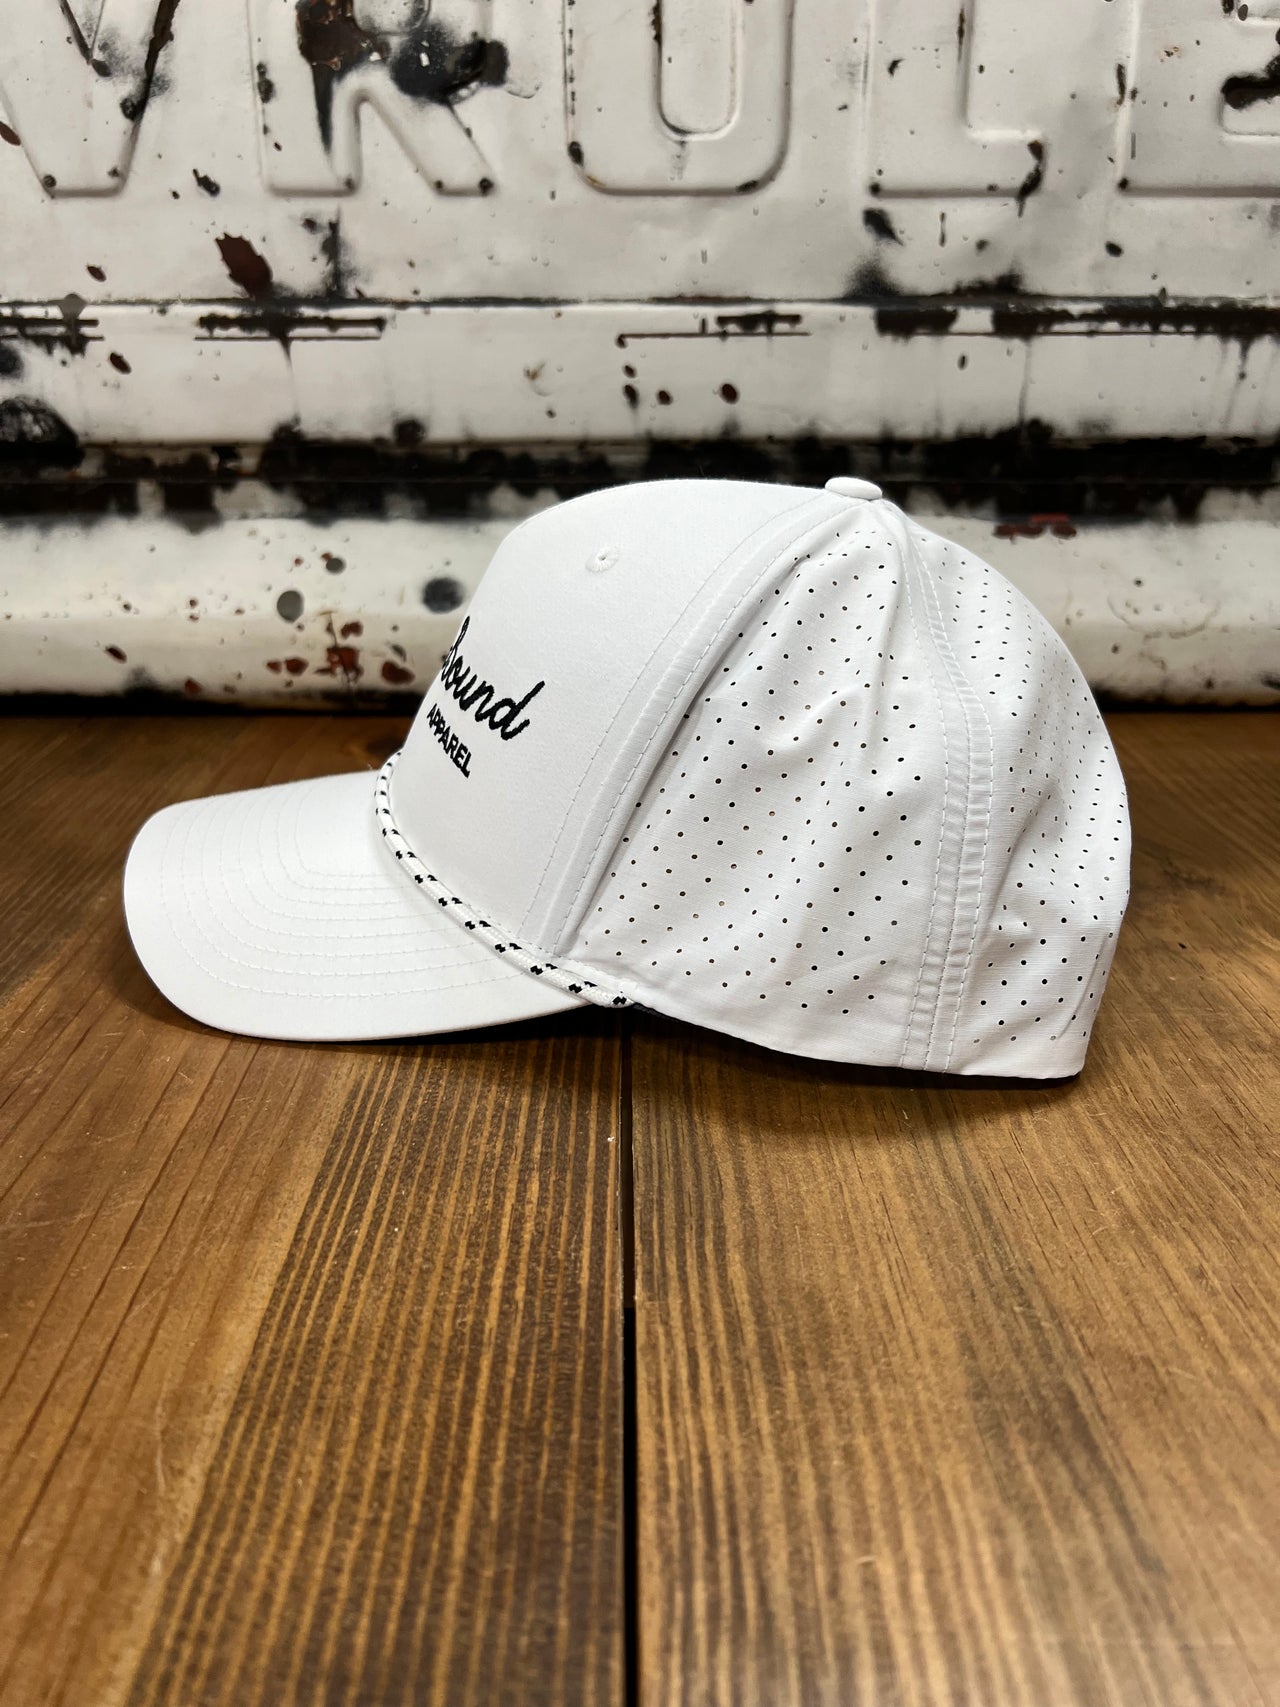 Home Bound Golf Performance Rope Cap - White with White/Black Rope